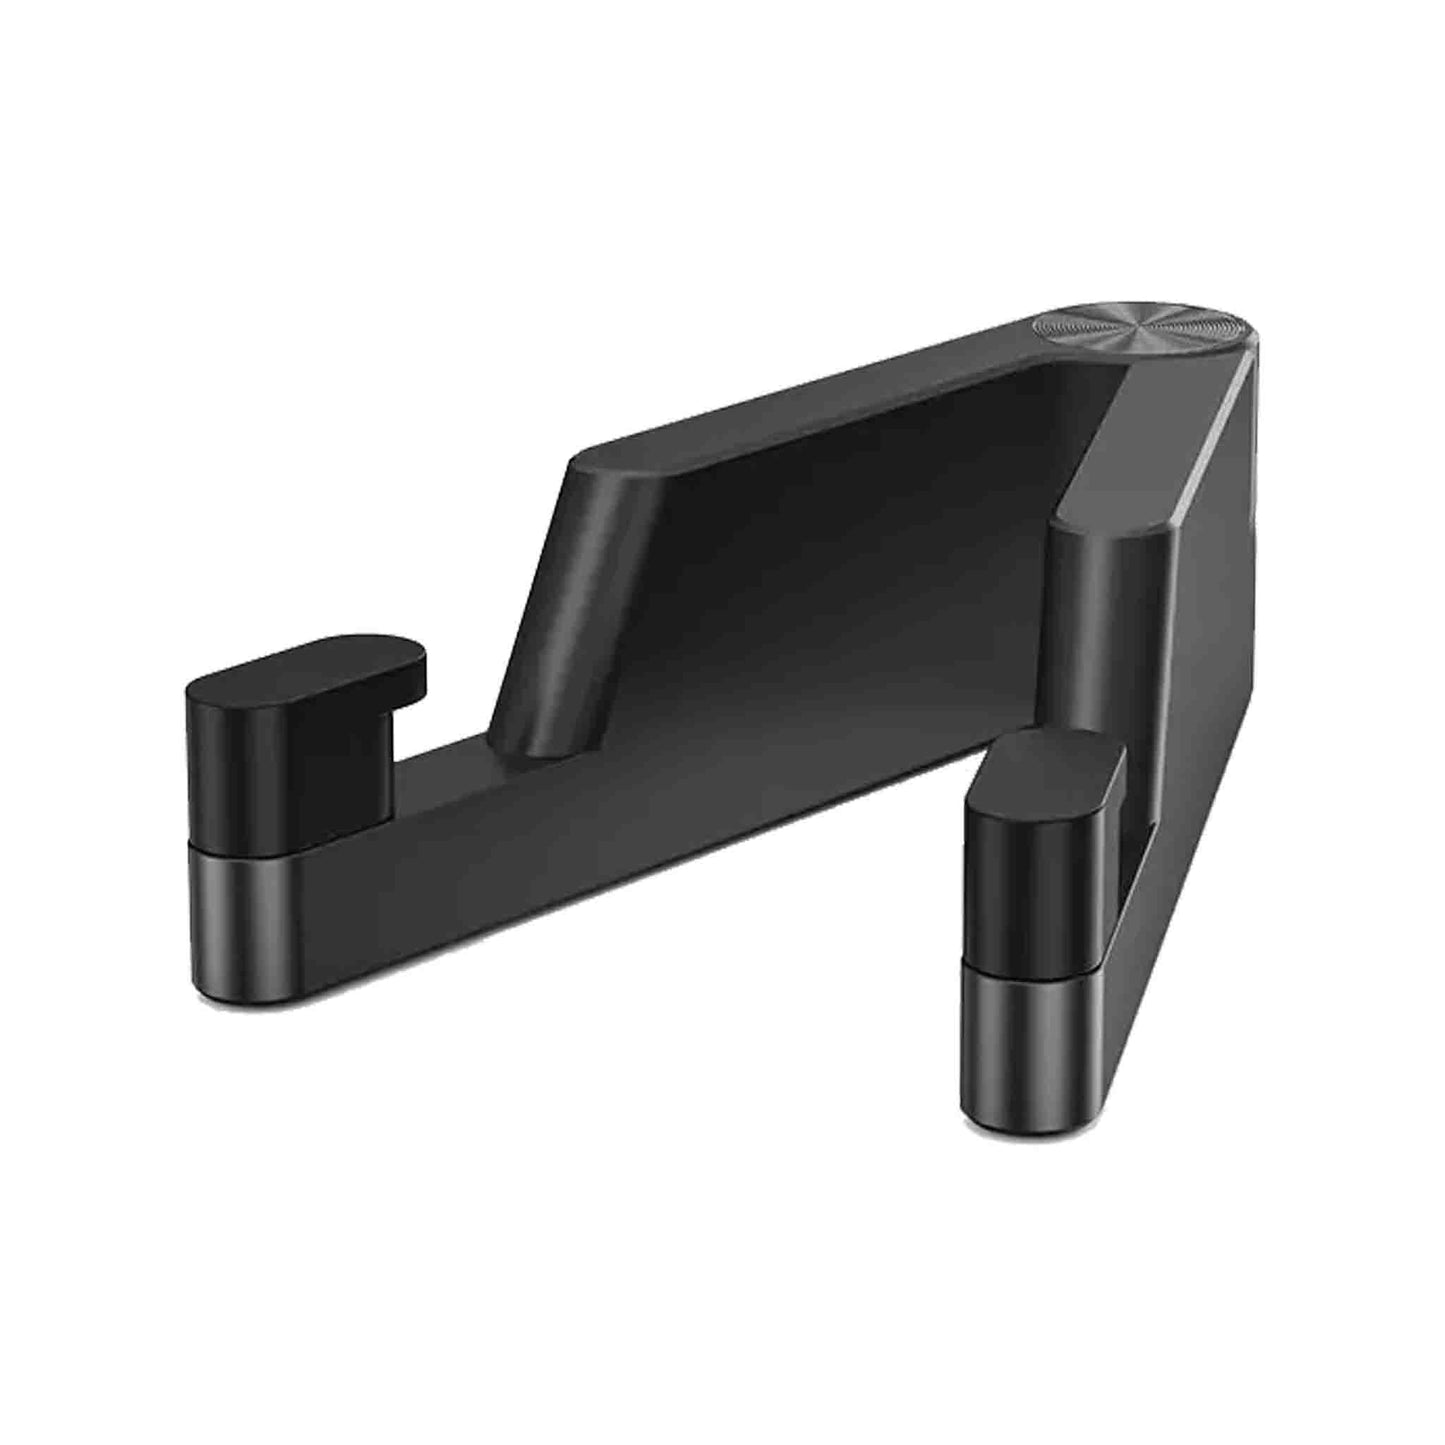 MagStand "angle" cell phone holder 